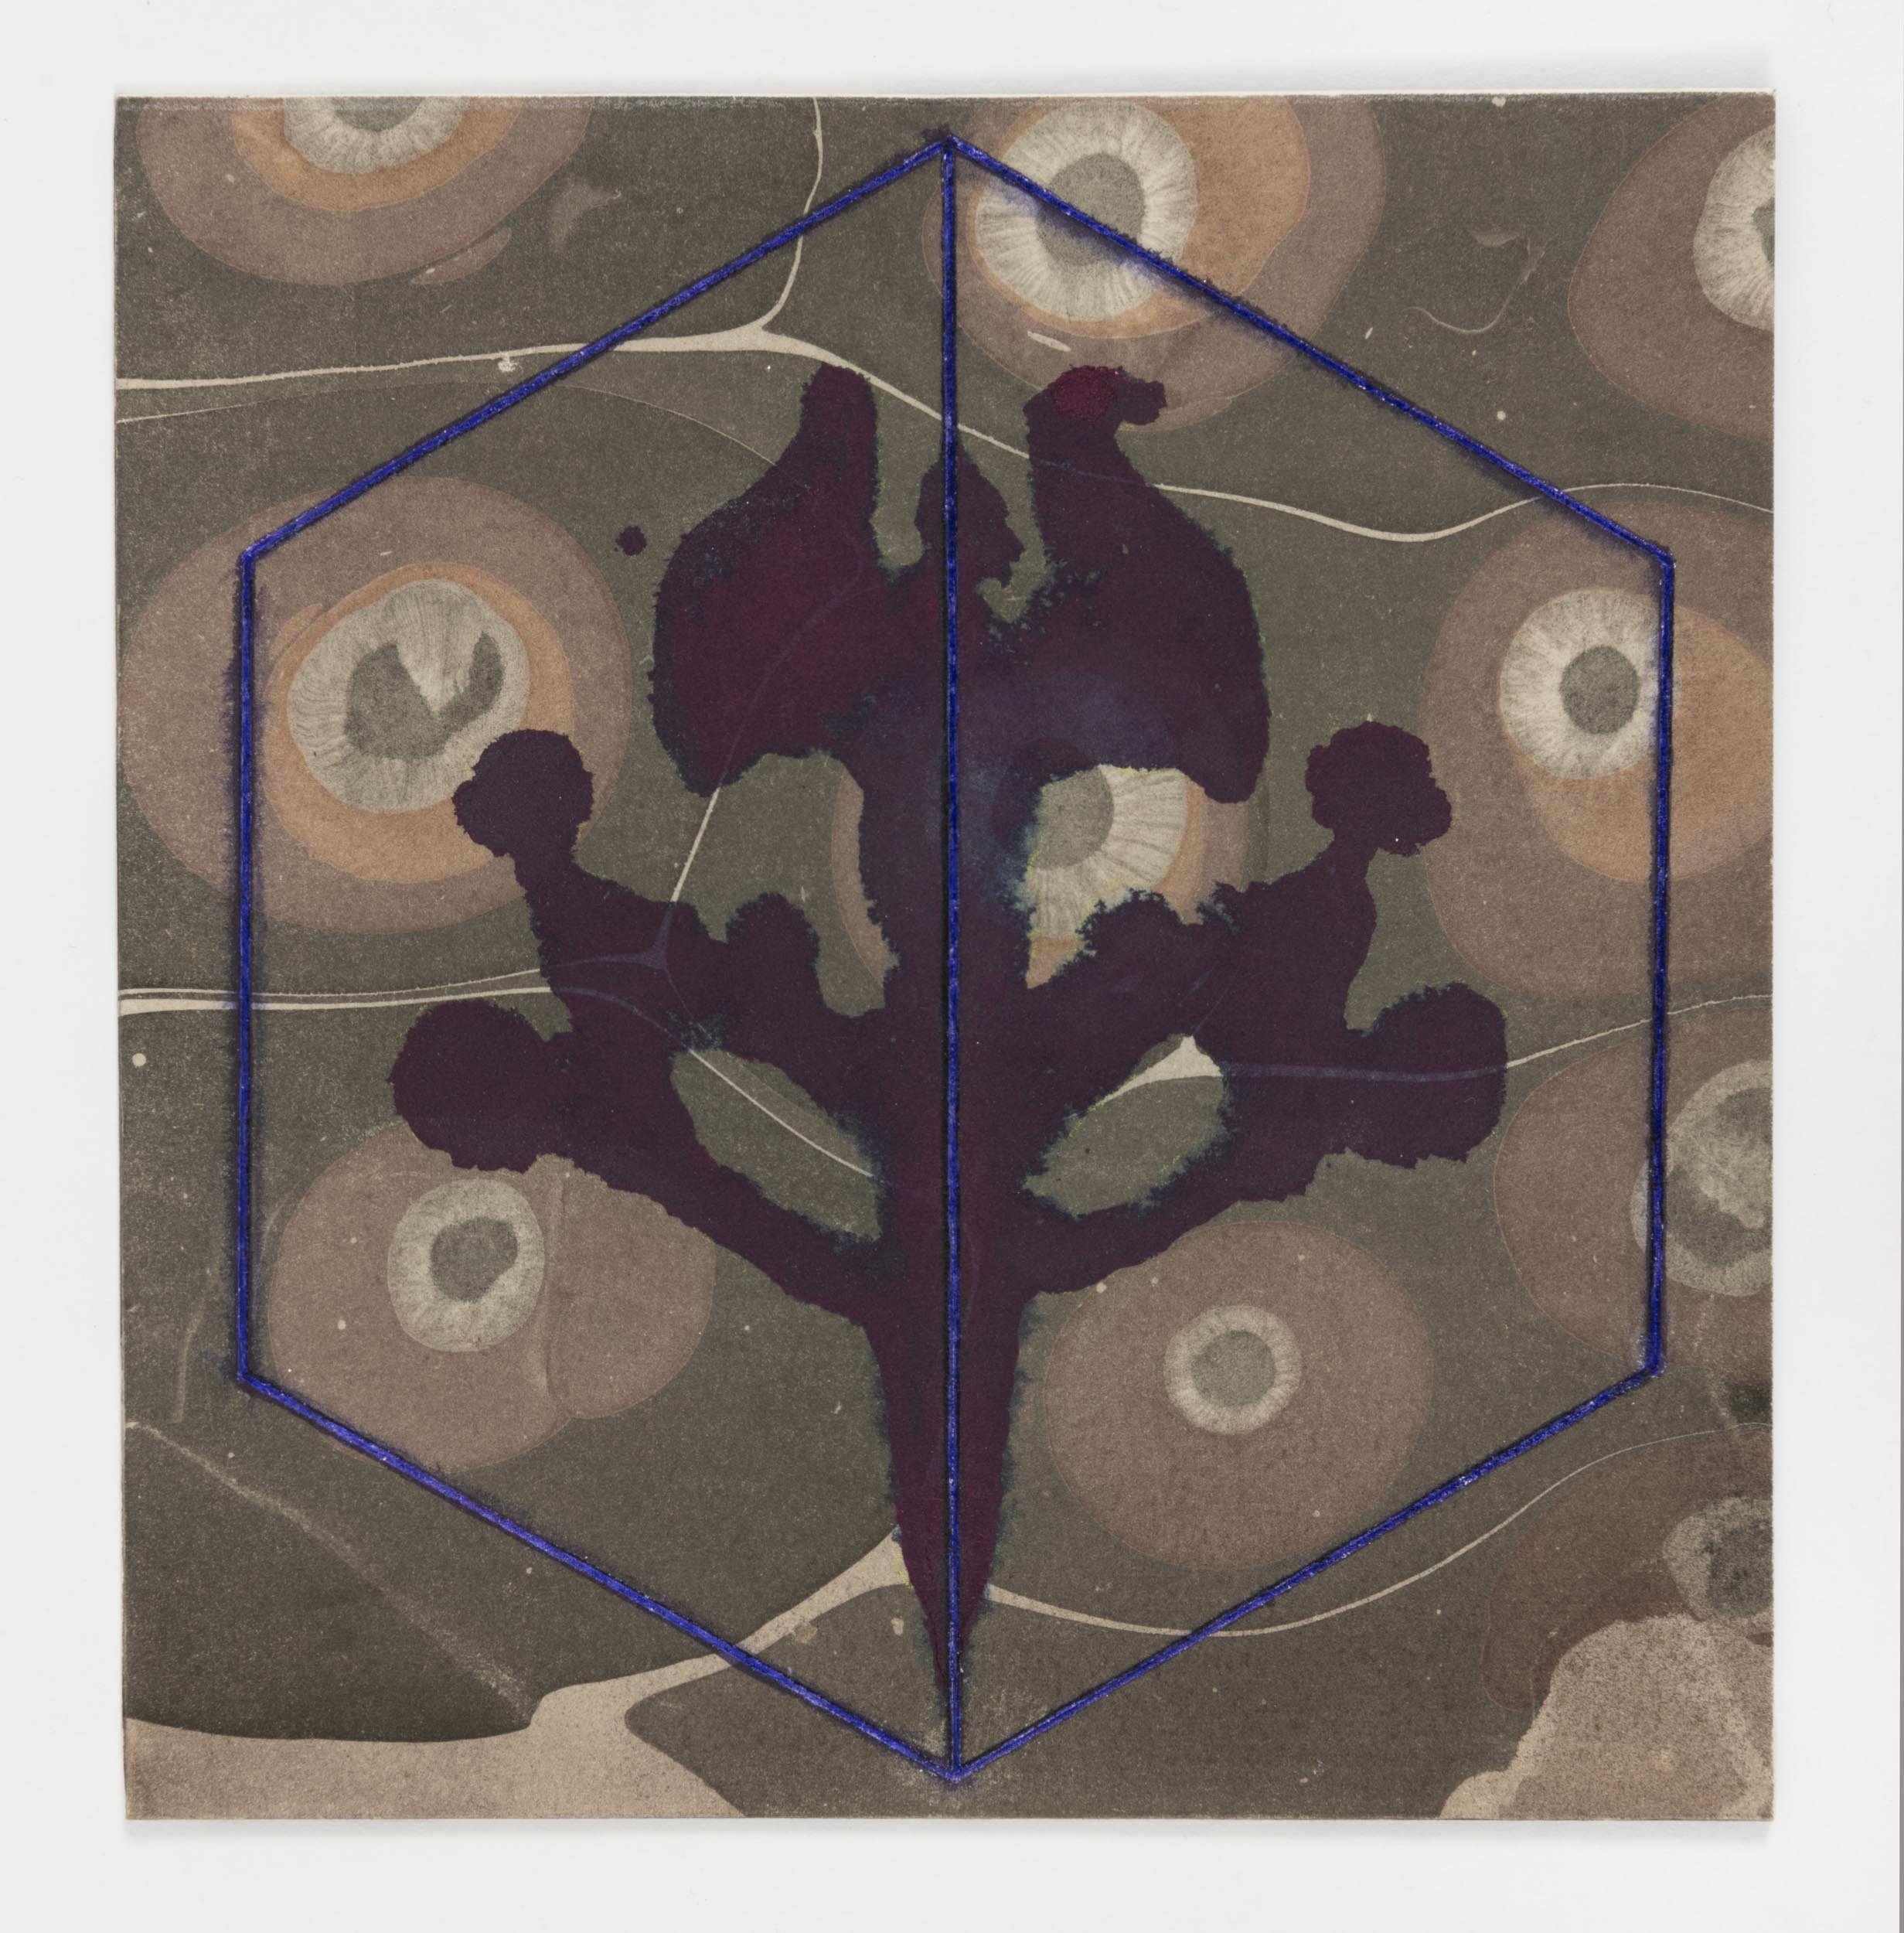  Rorschach 3, 2021 gouache with toned aluminum leaf on paper 7¼ x 7 in. &nbsp; 18.41 x 17.78 cm. 